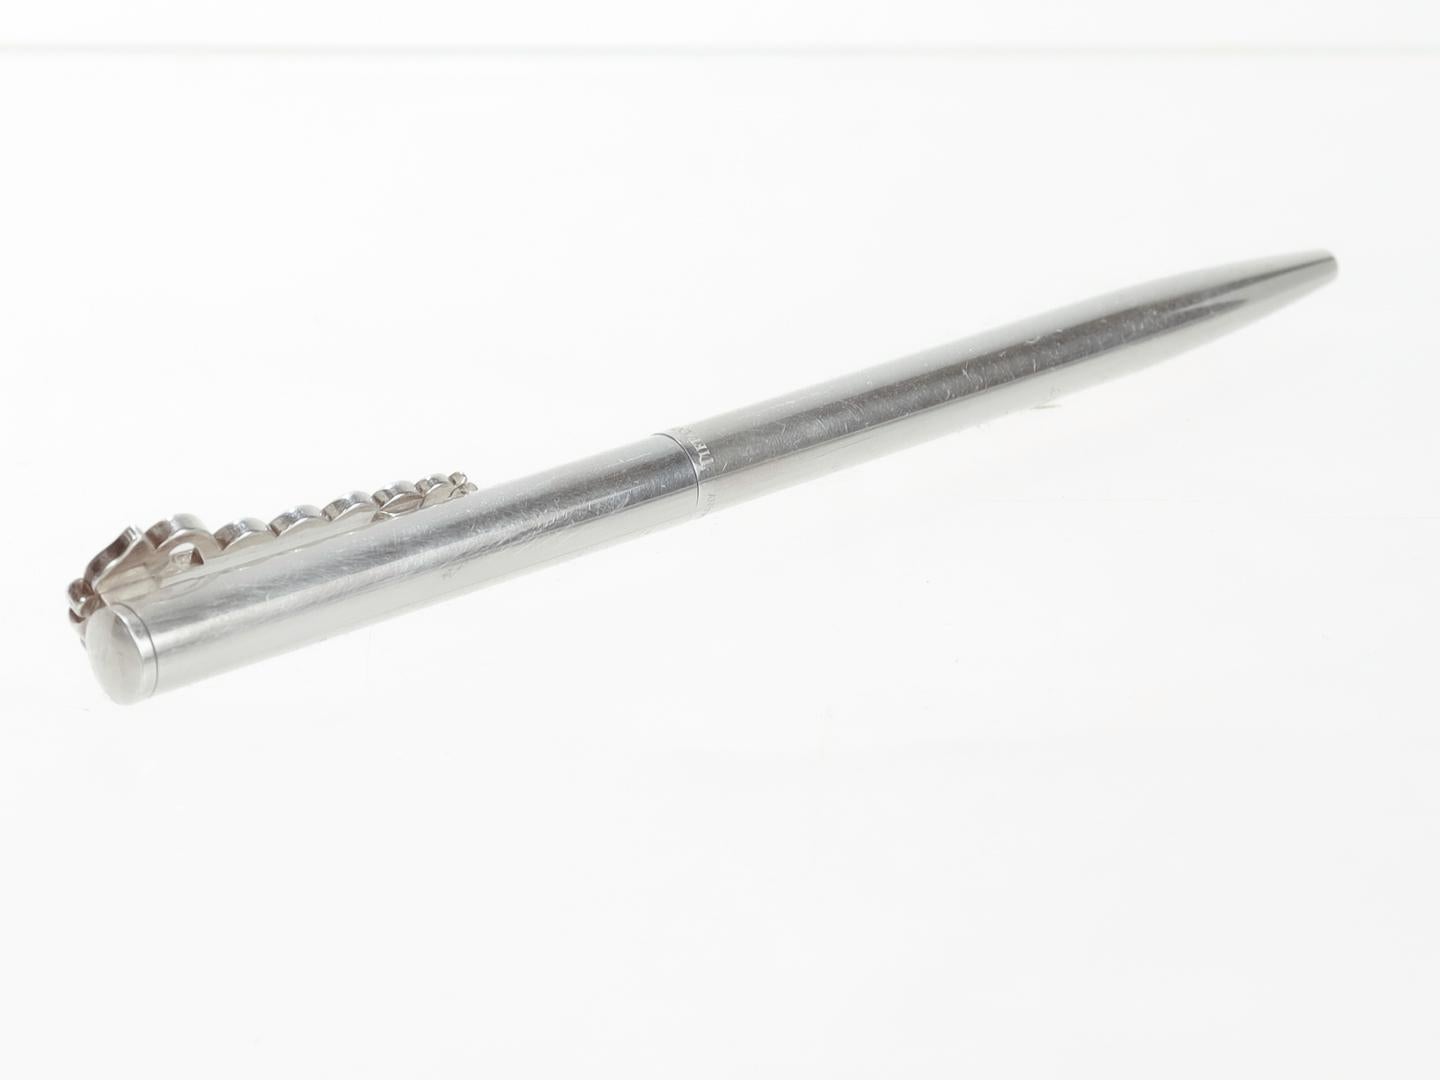 Tiffany & Co. Sterling Silver Caduceus Ballpoint Pen In Good Condition For Sale In Philadelphia, PA